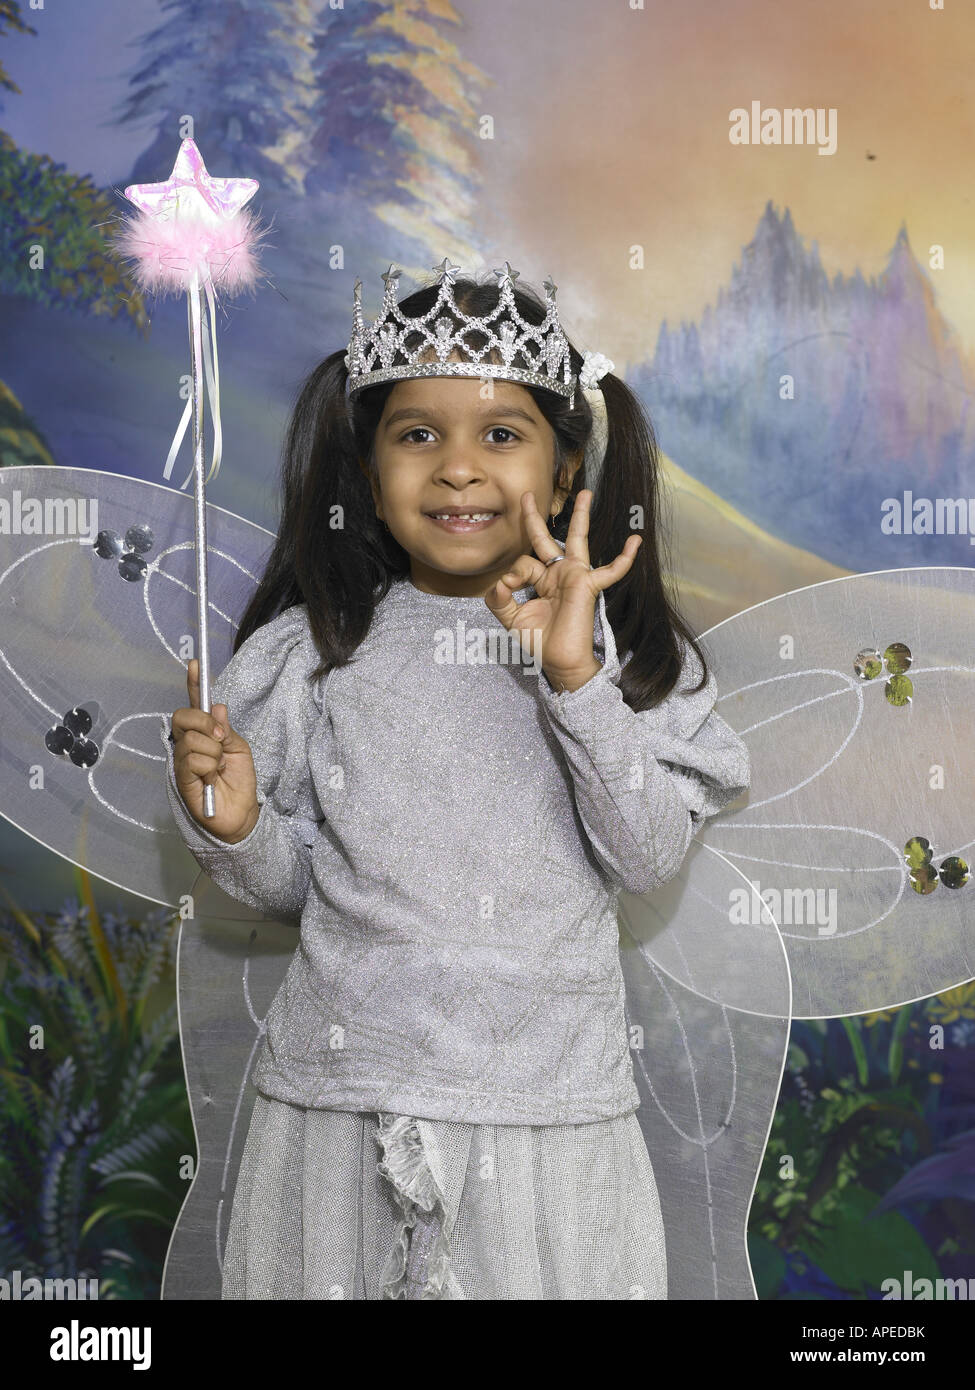 https://c8.alamy.com/comp/APEDBK/south-asian-indian-girl-dressed-as-fairy-performing-fancy-dress-competition-APEDBK.jpg